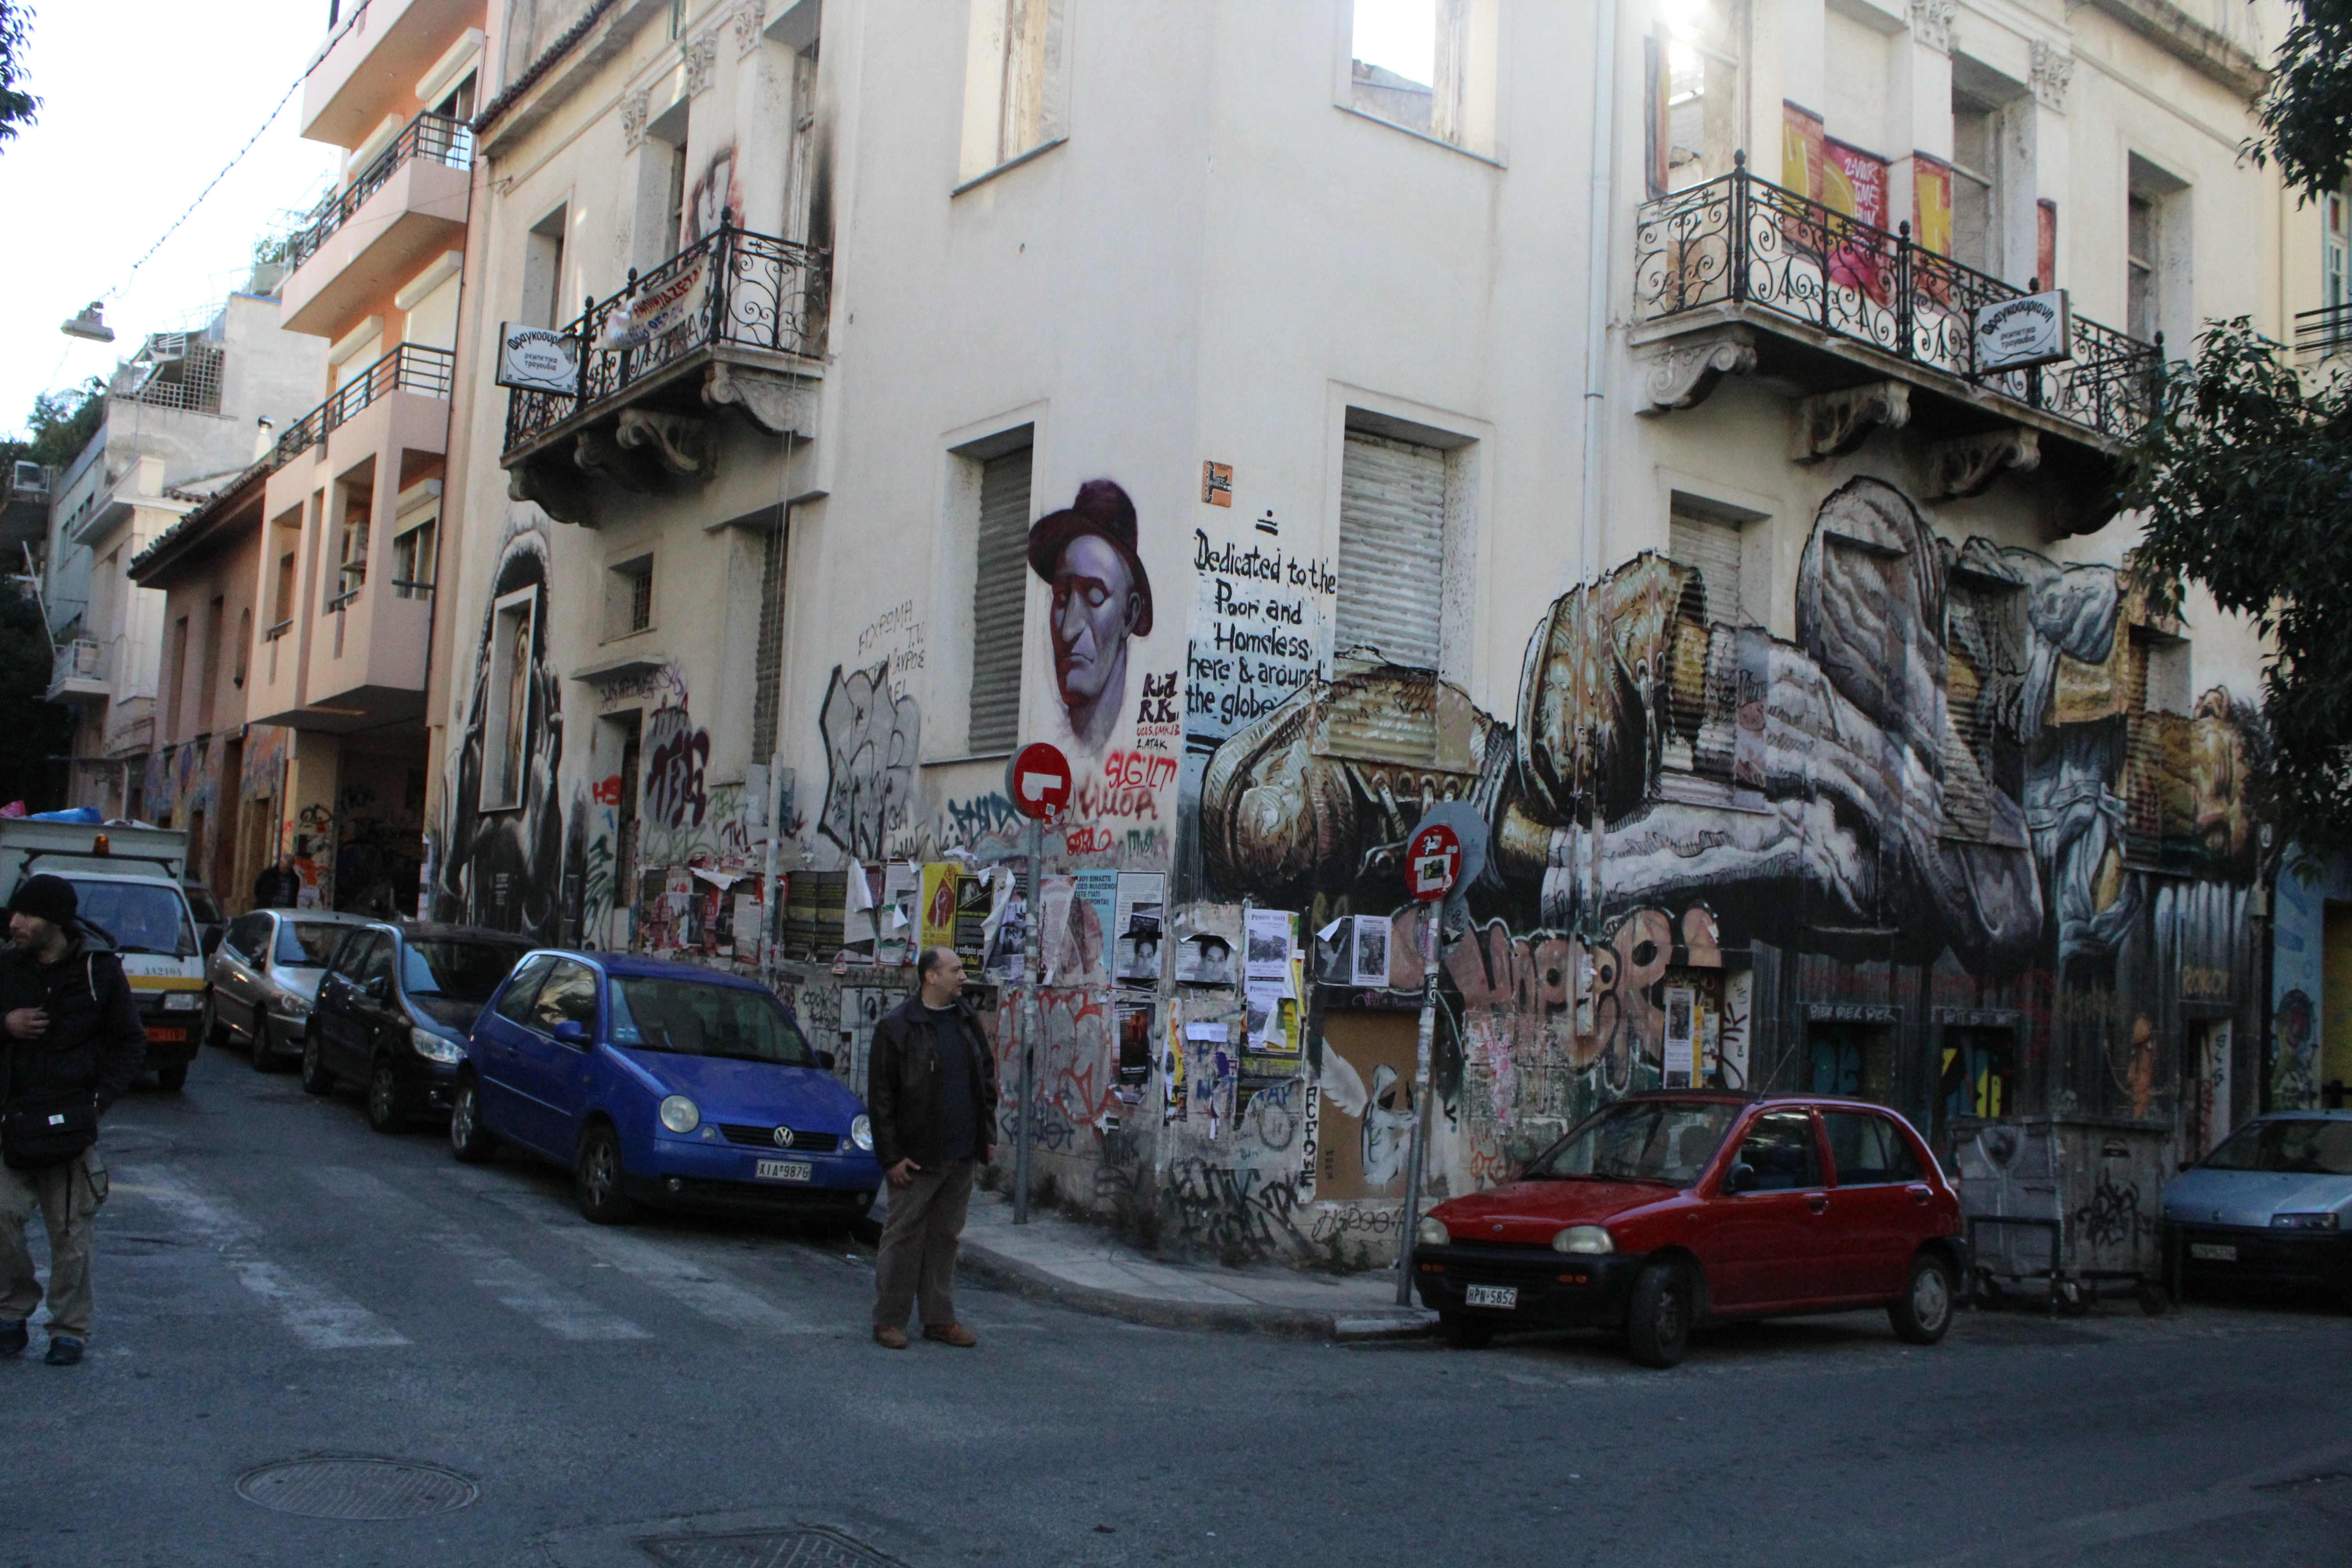 Street art in Exarchia that reads "Dedicated to the Poor and Homeless Here and Around the World"